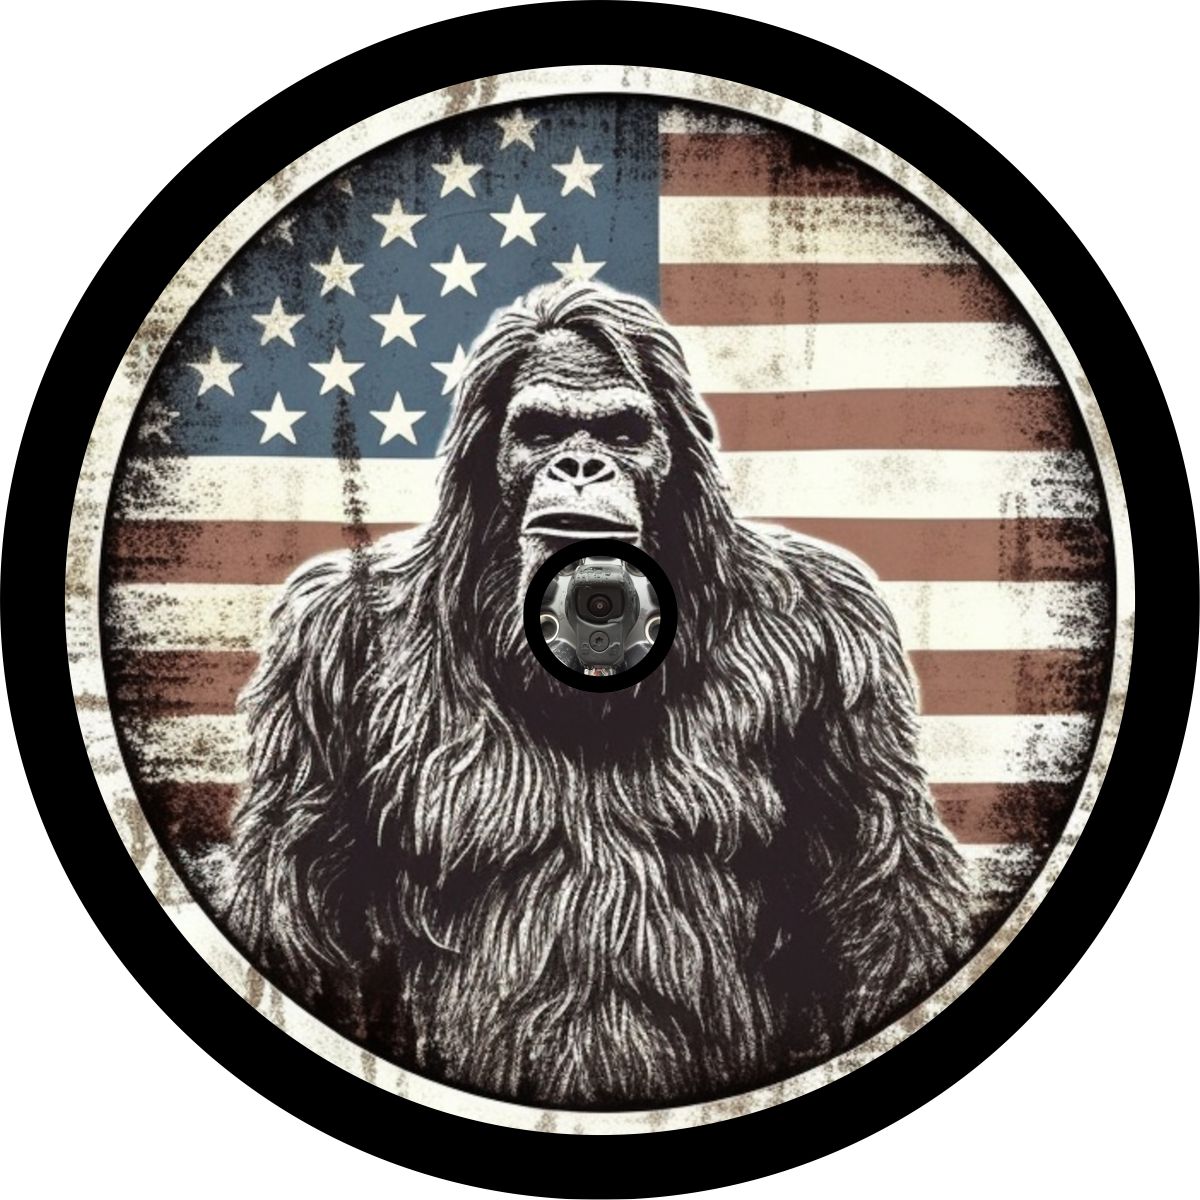 Turn of the 20th century style graphic design of a Sasquatch spare tire cover with an American Flag background and a hole for a backup camera.